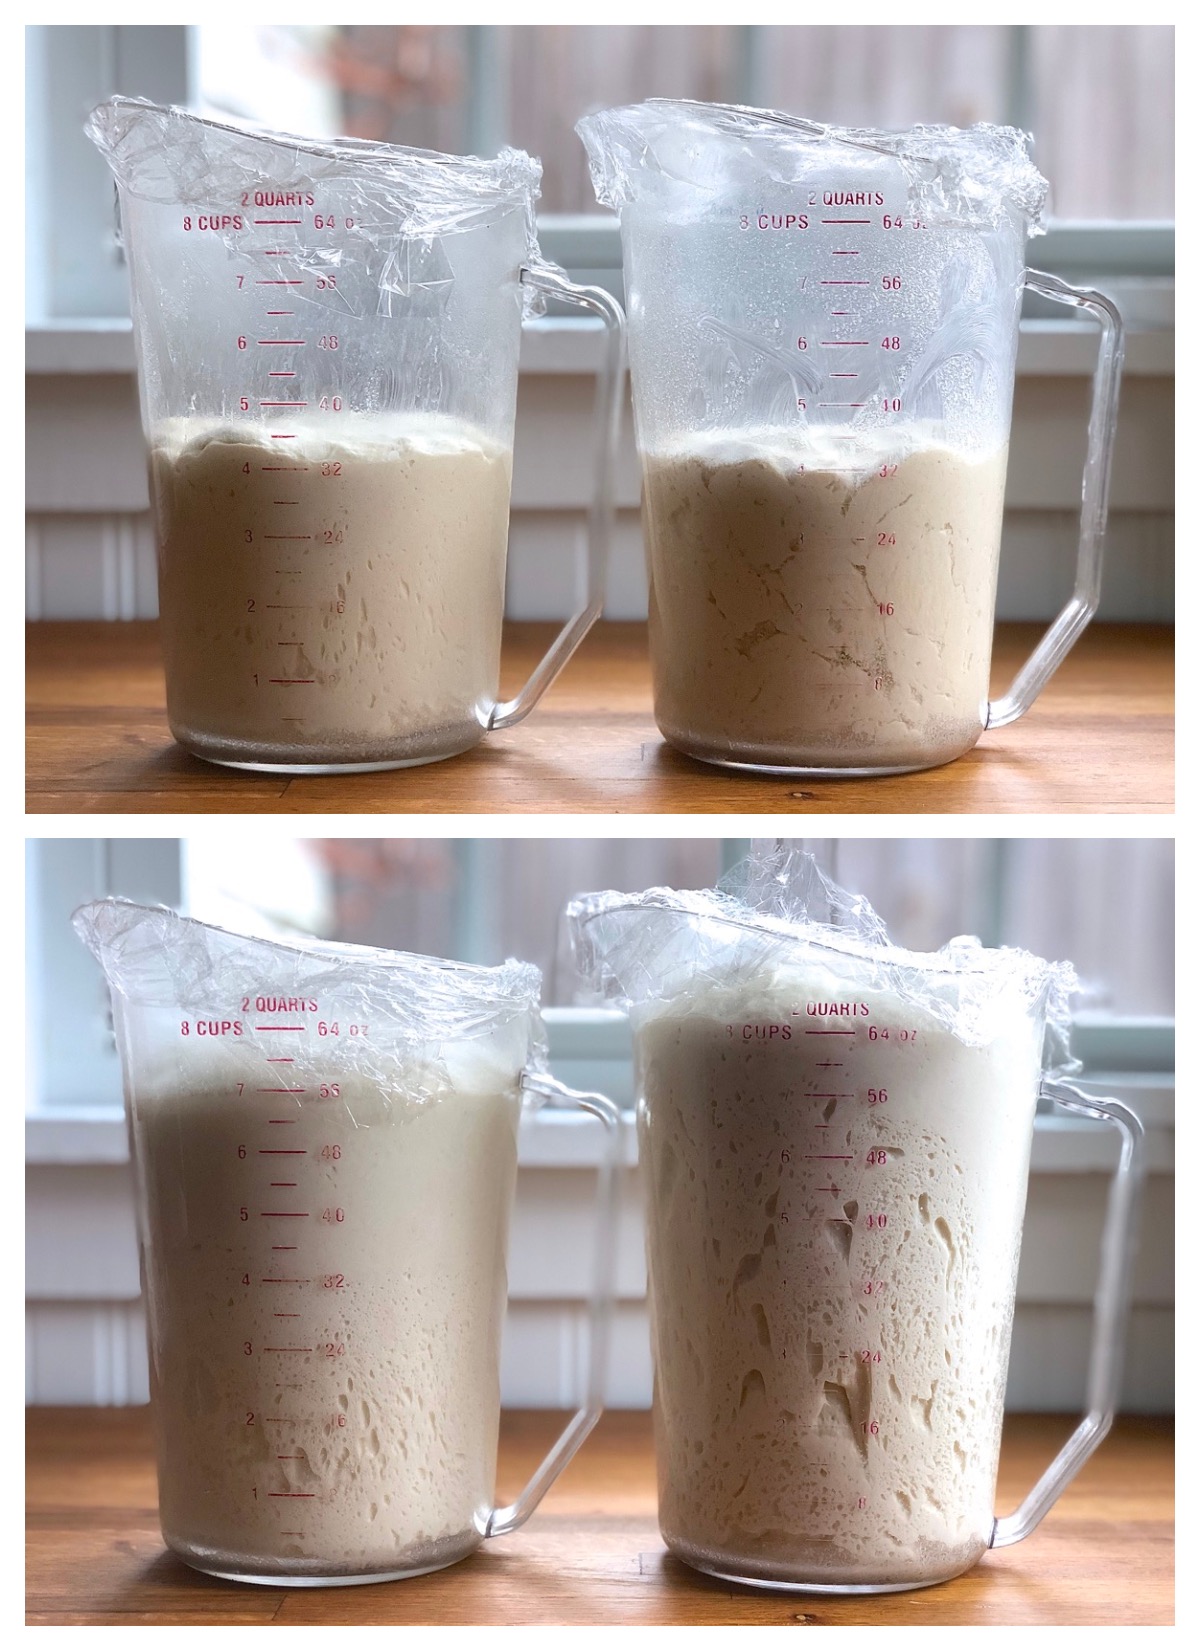 Two batches of dough in two 8-cup measuring cups, showing before and after of the rising process. 